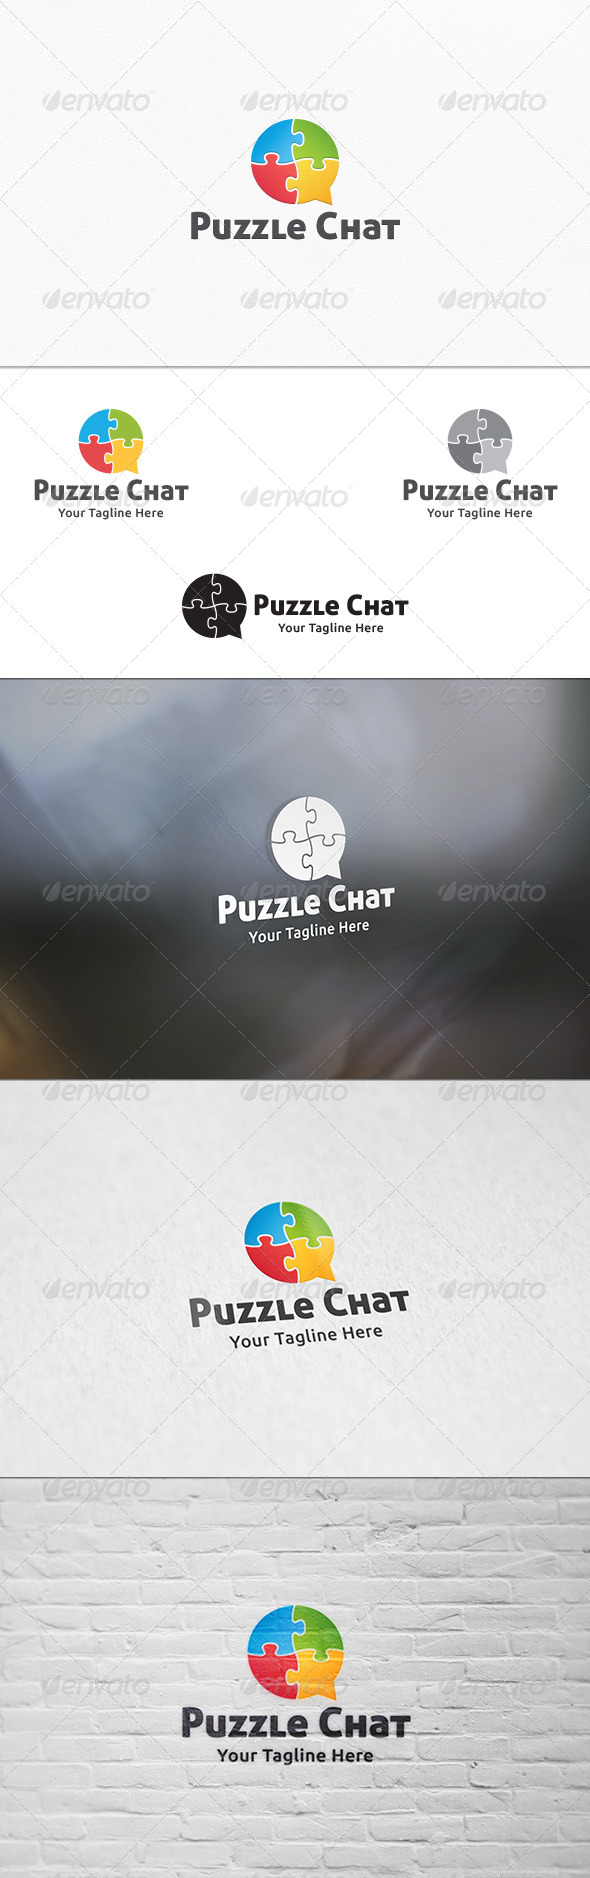 Puzzle Chat Logo Template By Martinjamez Graphicriver